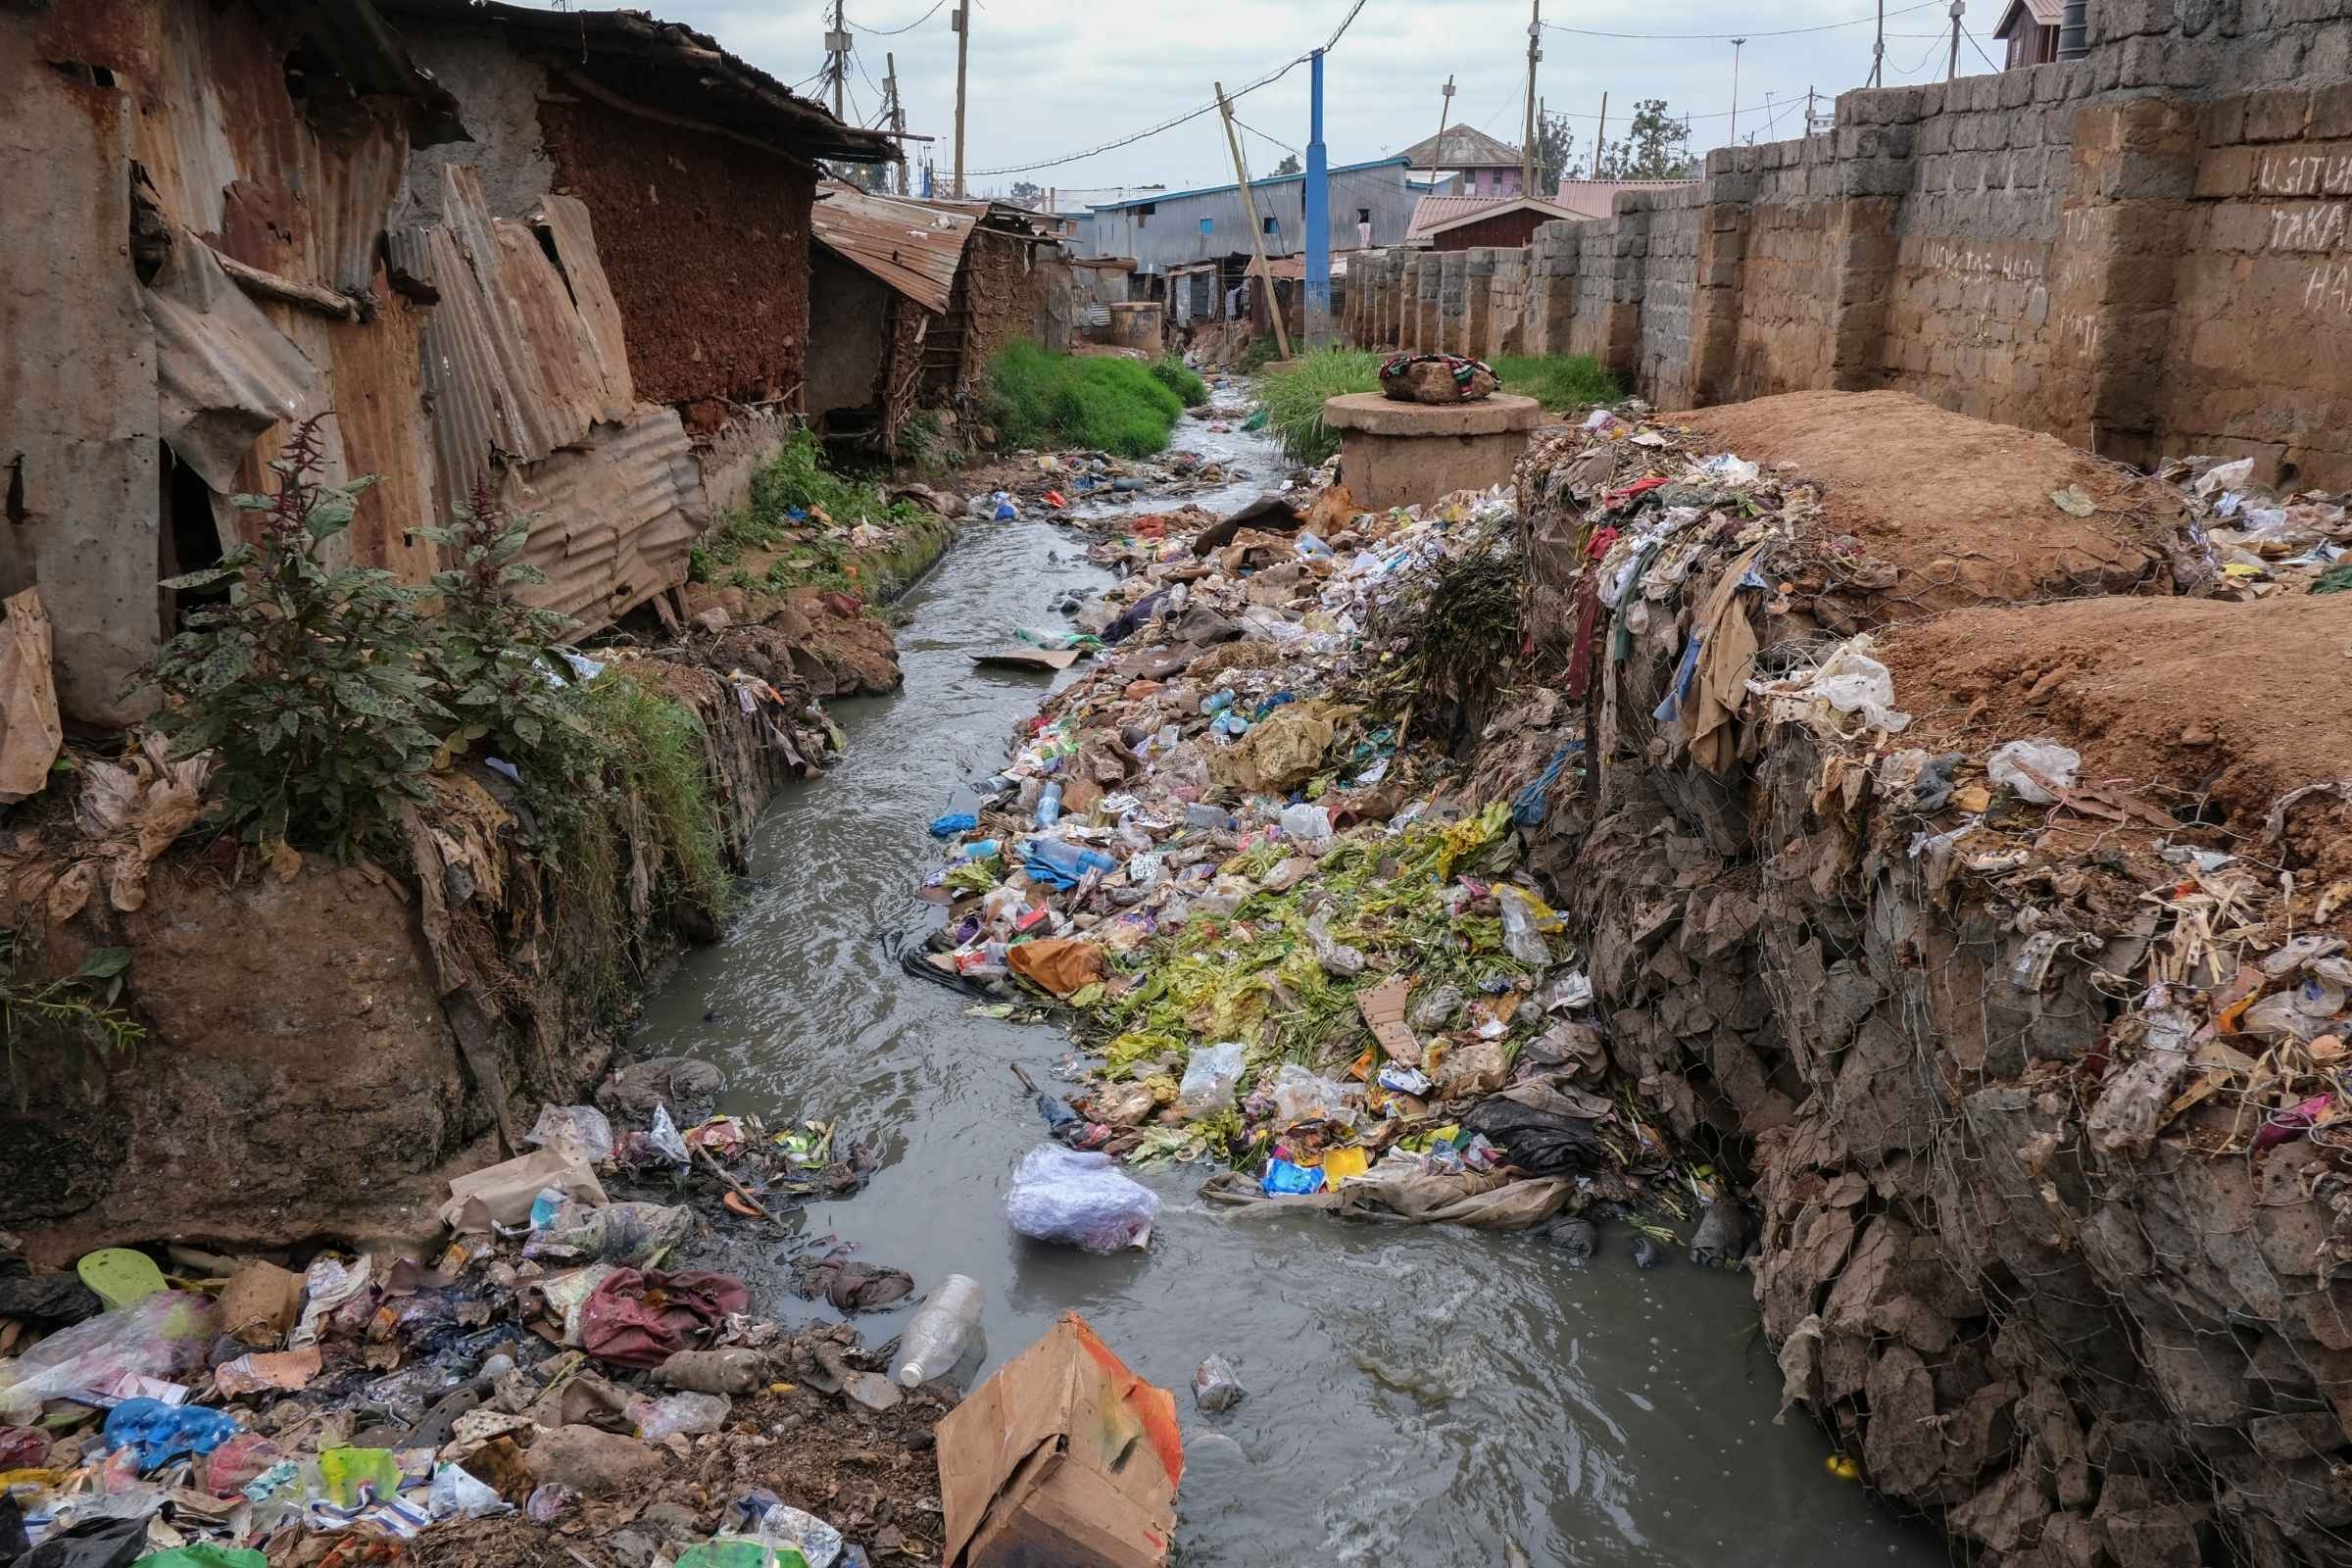 In the Kibera informal settlement in Nairobi more than 22000 residents live along the riverbanks of the Ngong River. Lack of appropriate infrastructure leads to waste being often disposed to water courses causing blockage and amplifying the effects of floods.